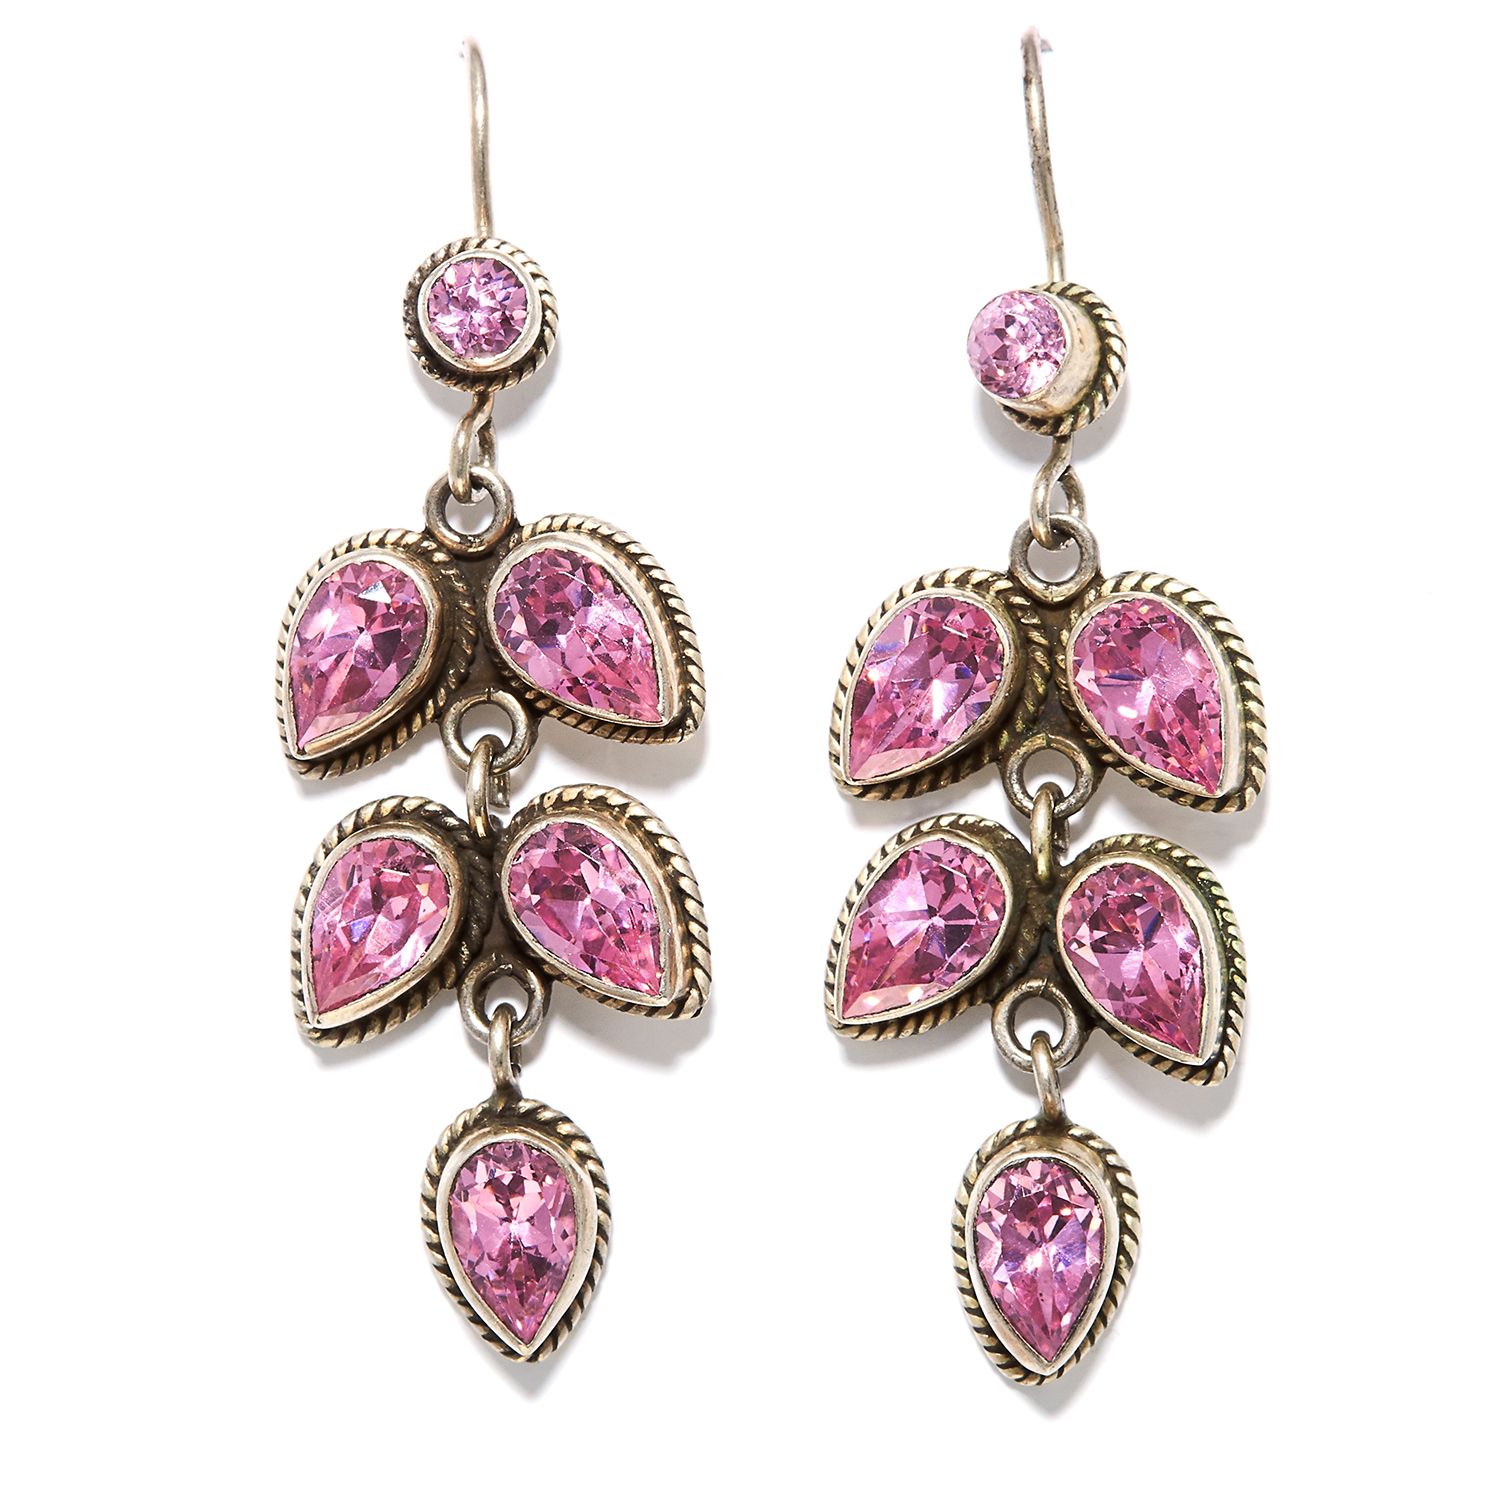 A PAIR OF GEM SET EARRINGS in sterling silver, set with round and pear cut pink gemstones, stamped